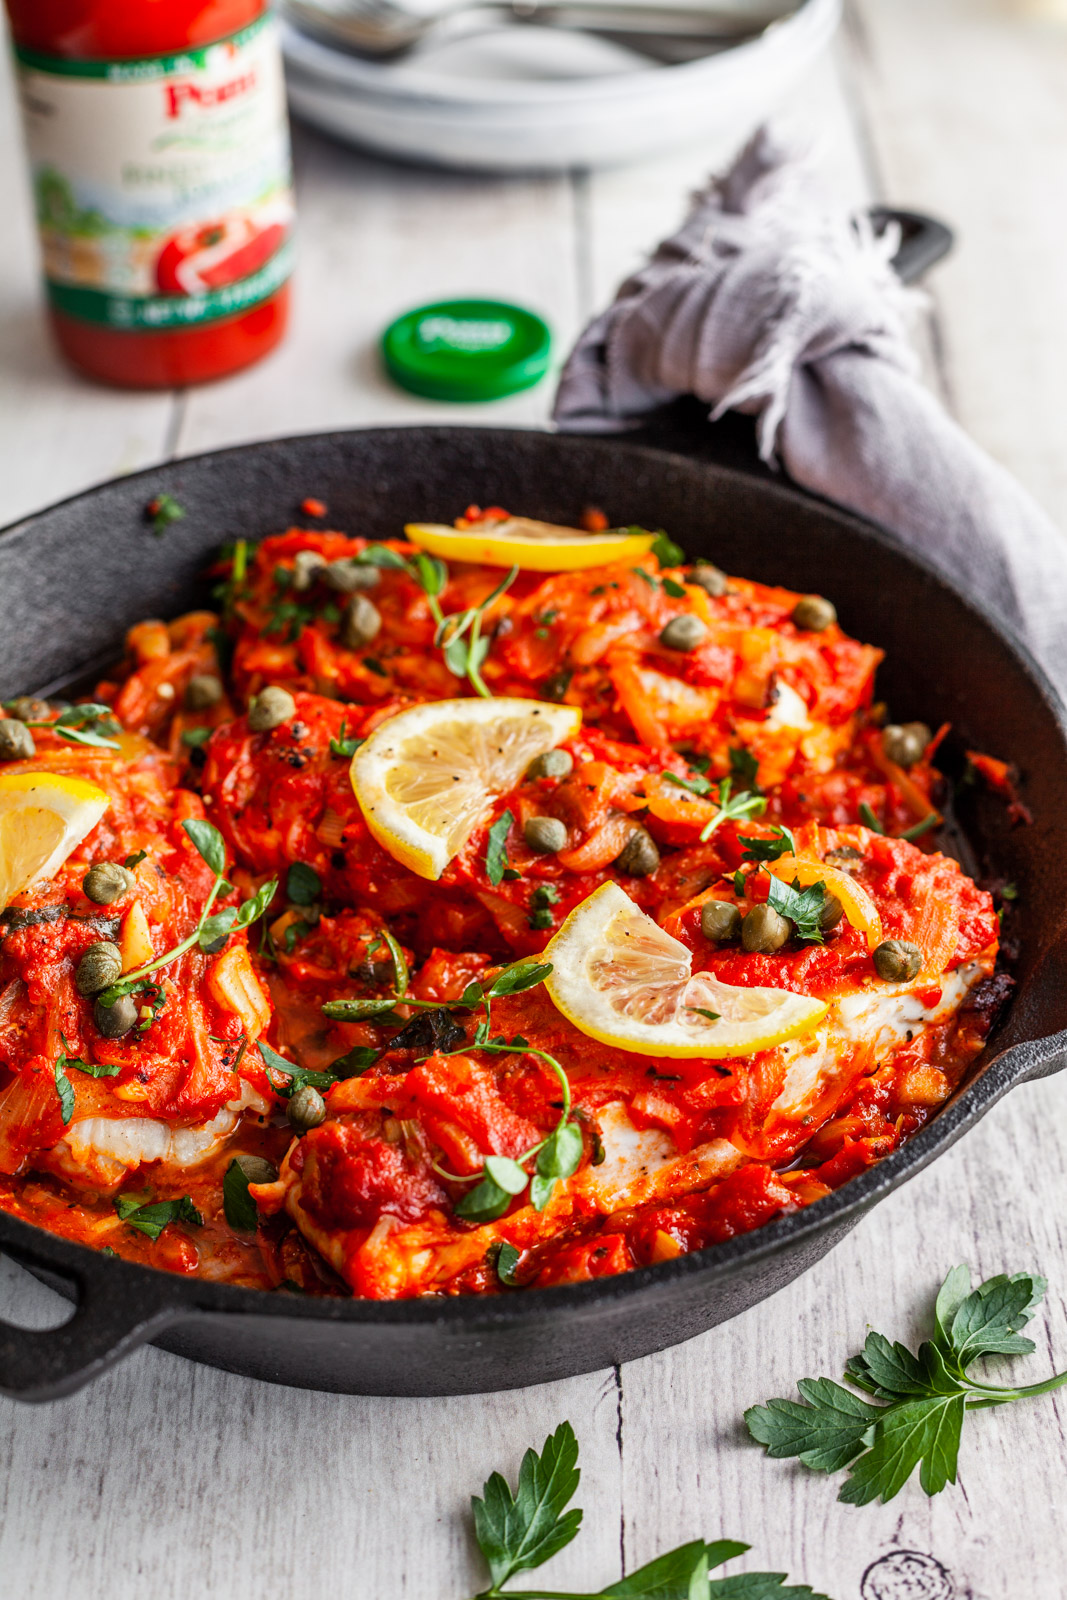 Greekstyle Baked Fish With Tomatoes and Onions (Bourdeto)